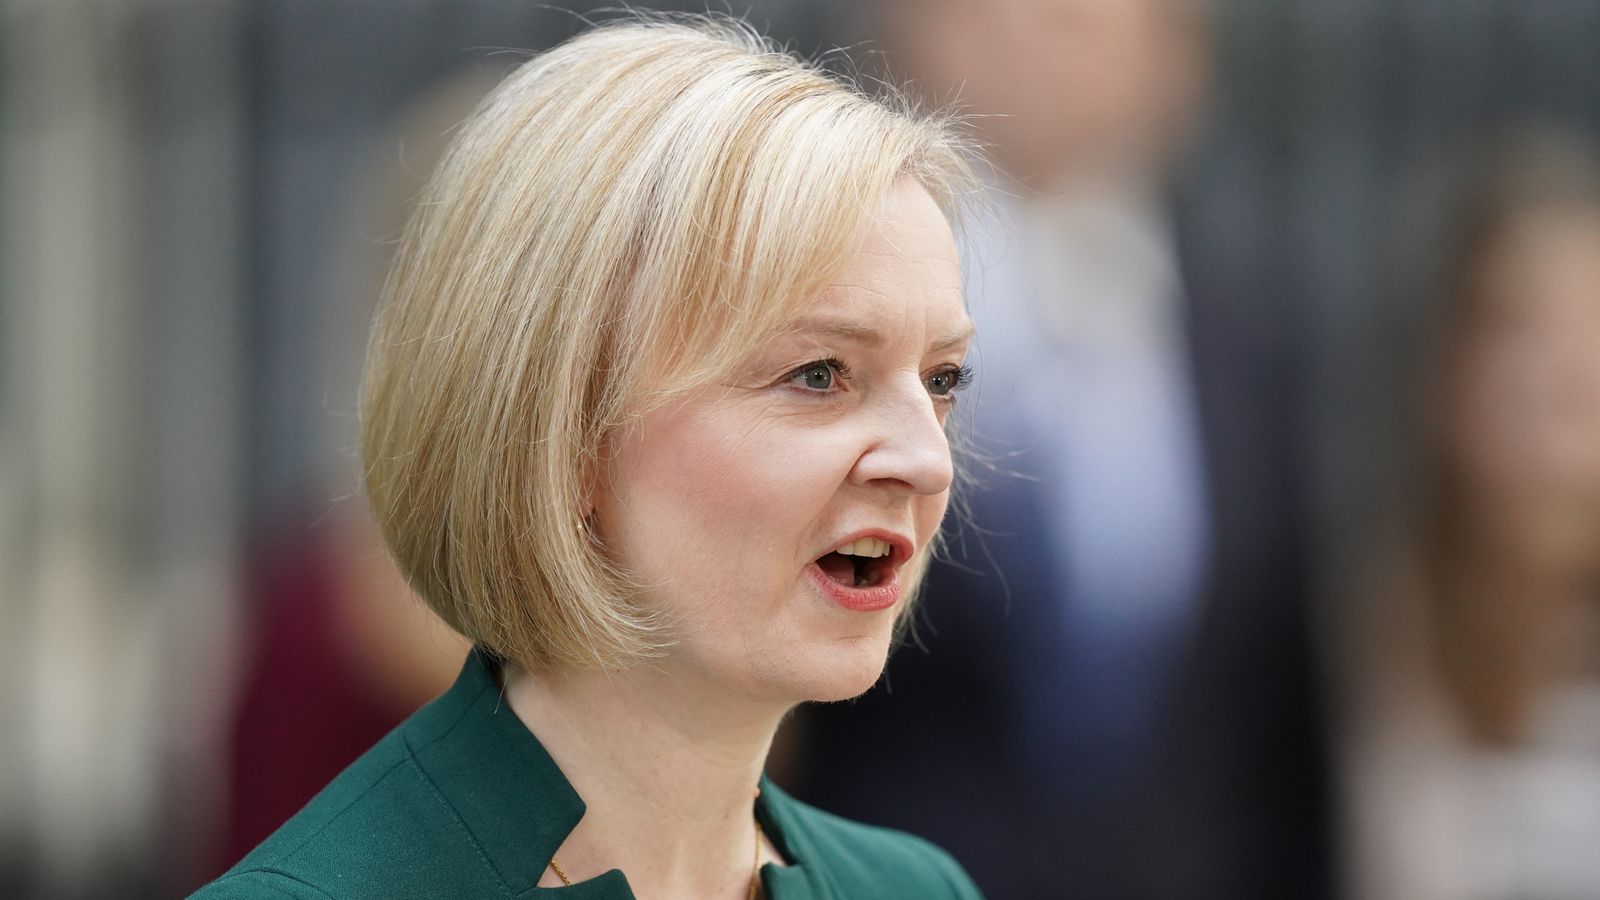 Liz Truss may be no Messiah but her political comeback has rattled some MPs